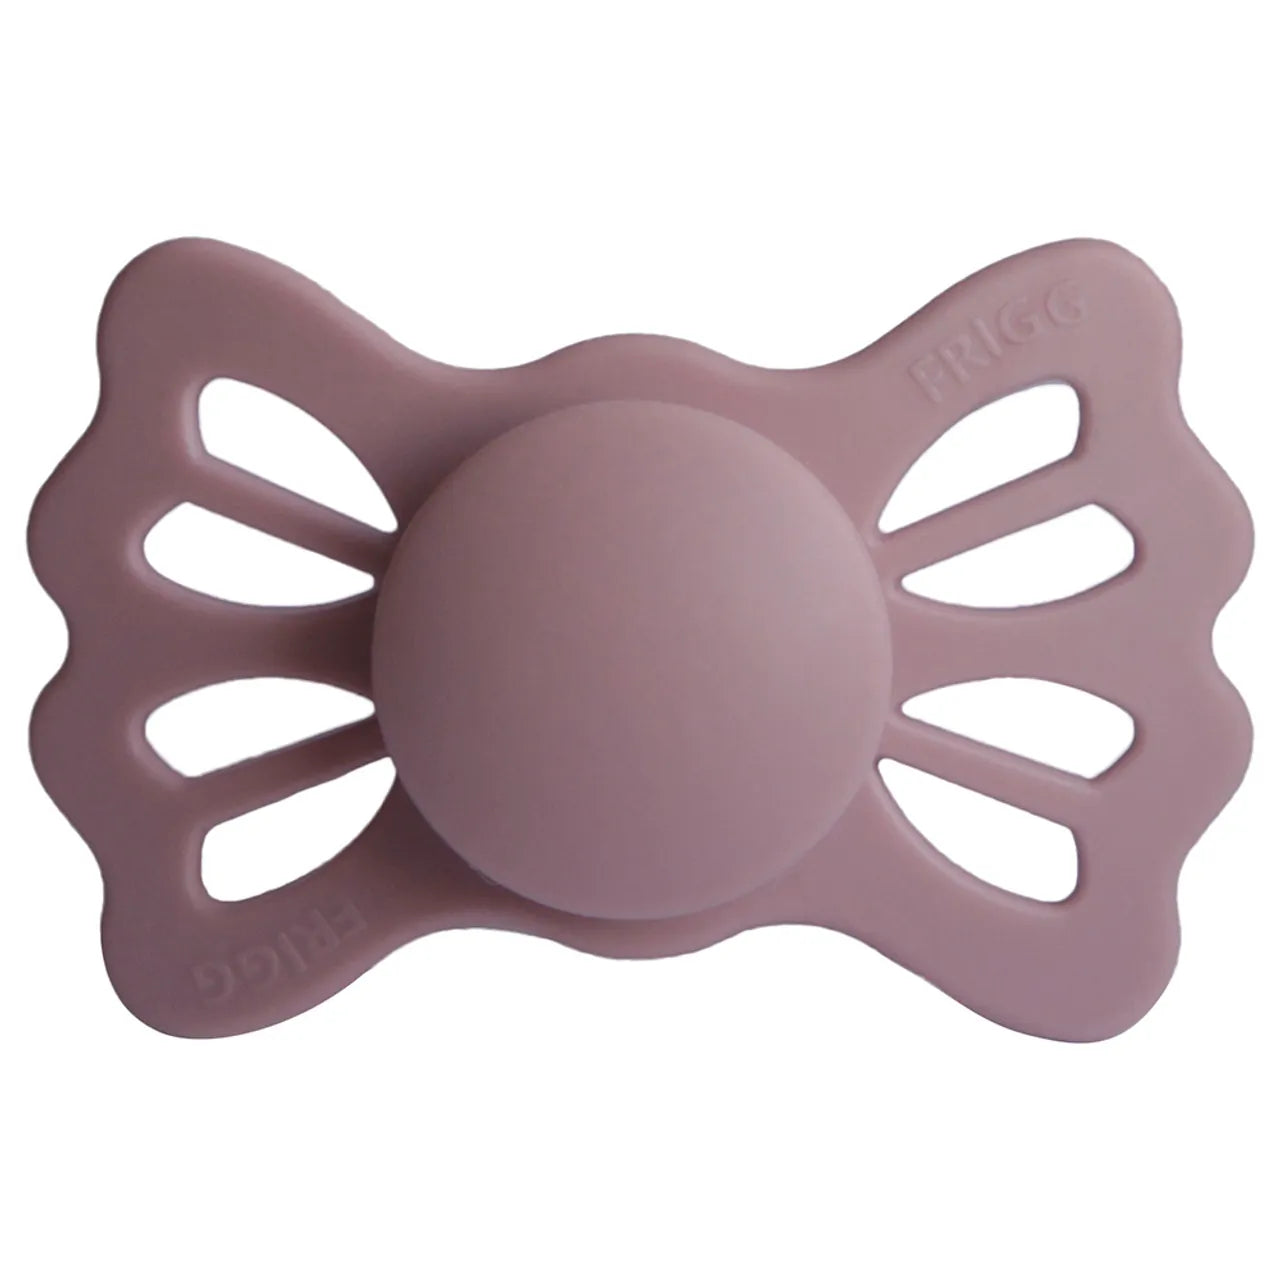 Frigg Lucky Symmetrical Silicone Baby Pacifier 6M-18M, Twillight Mauve - Size 2 - Laadlee